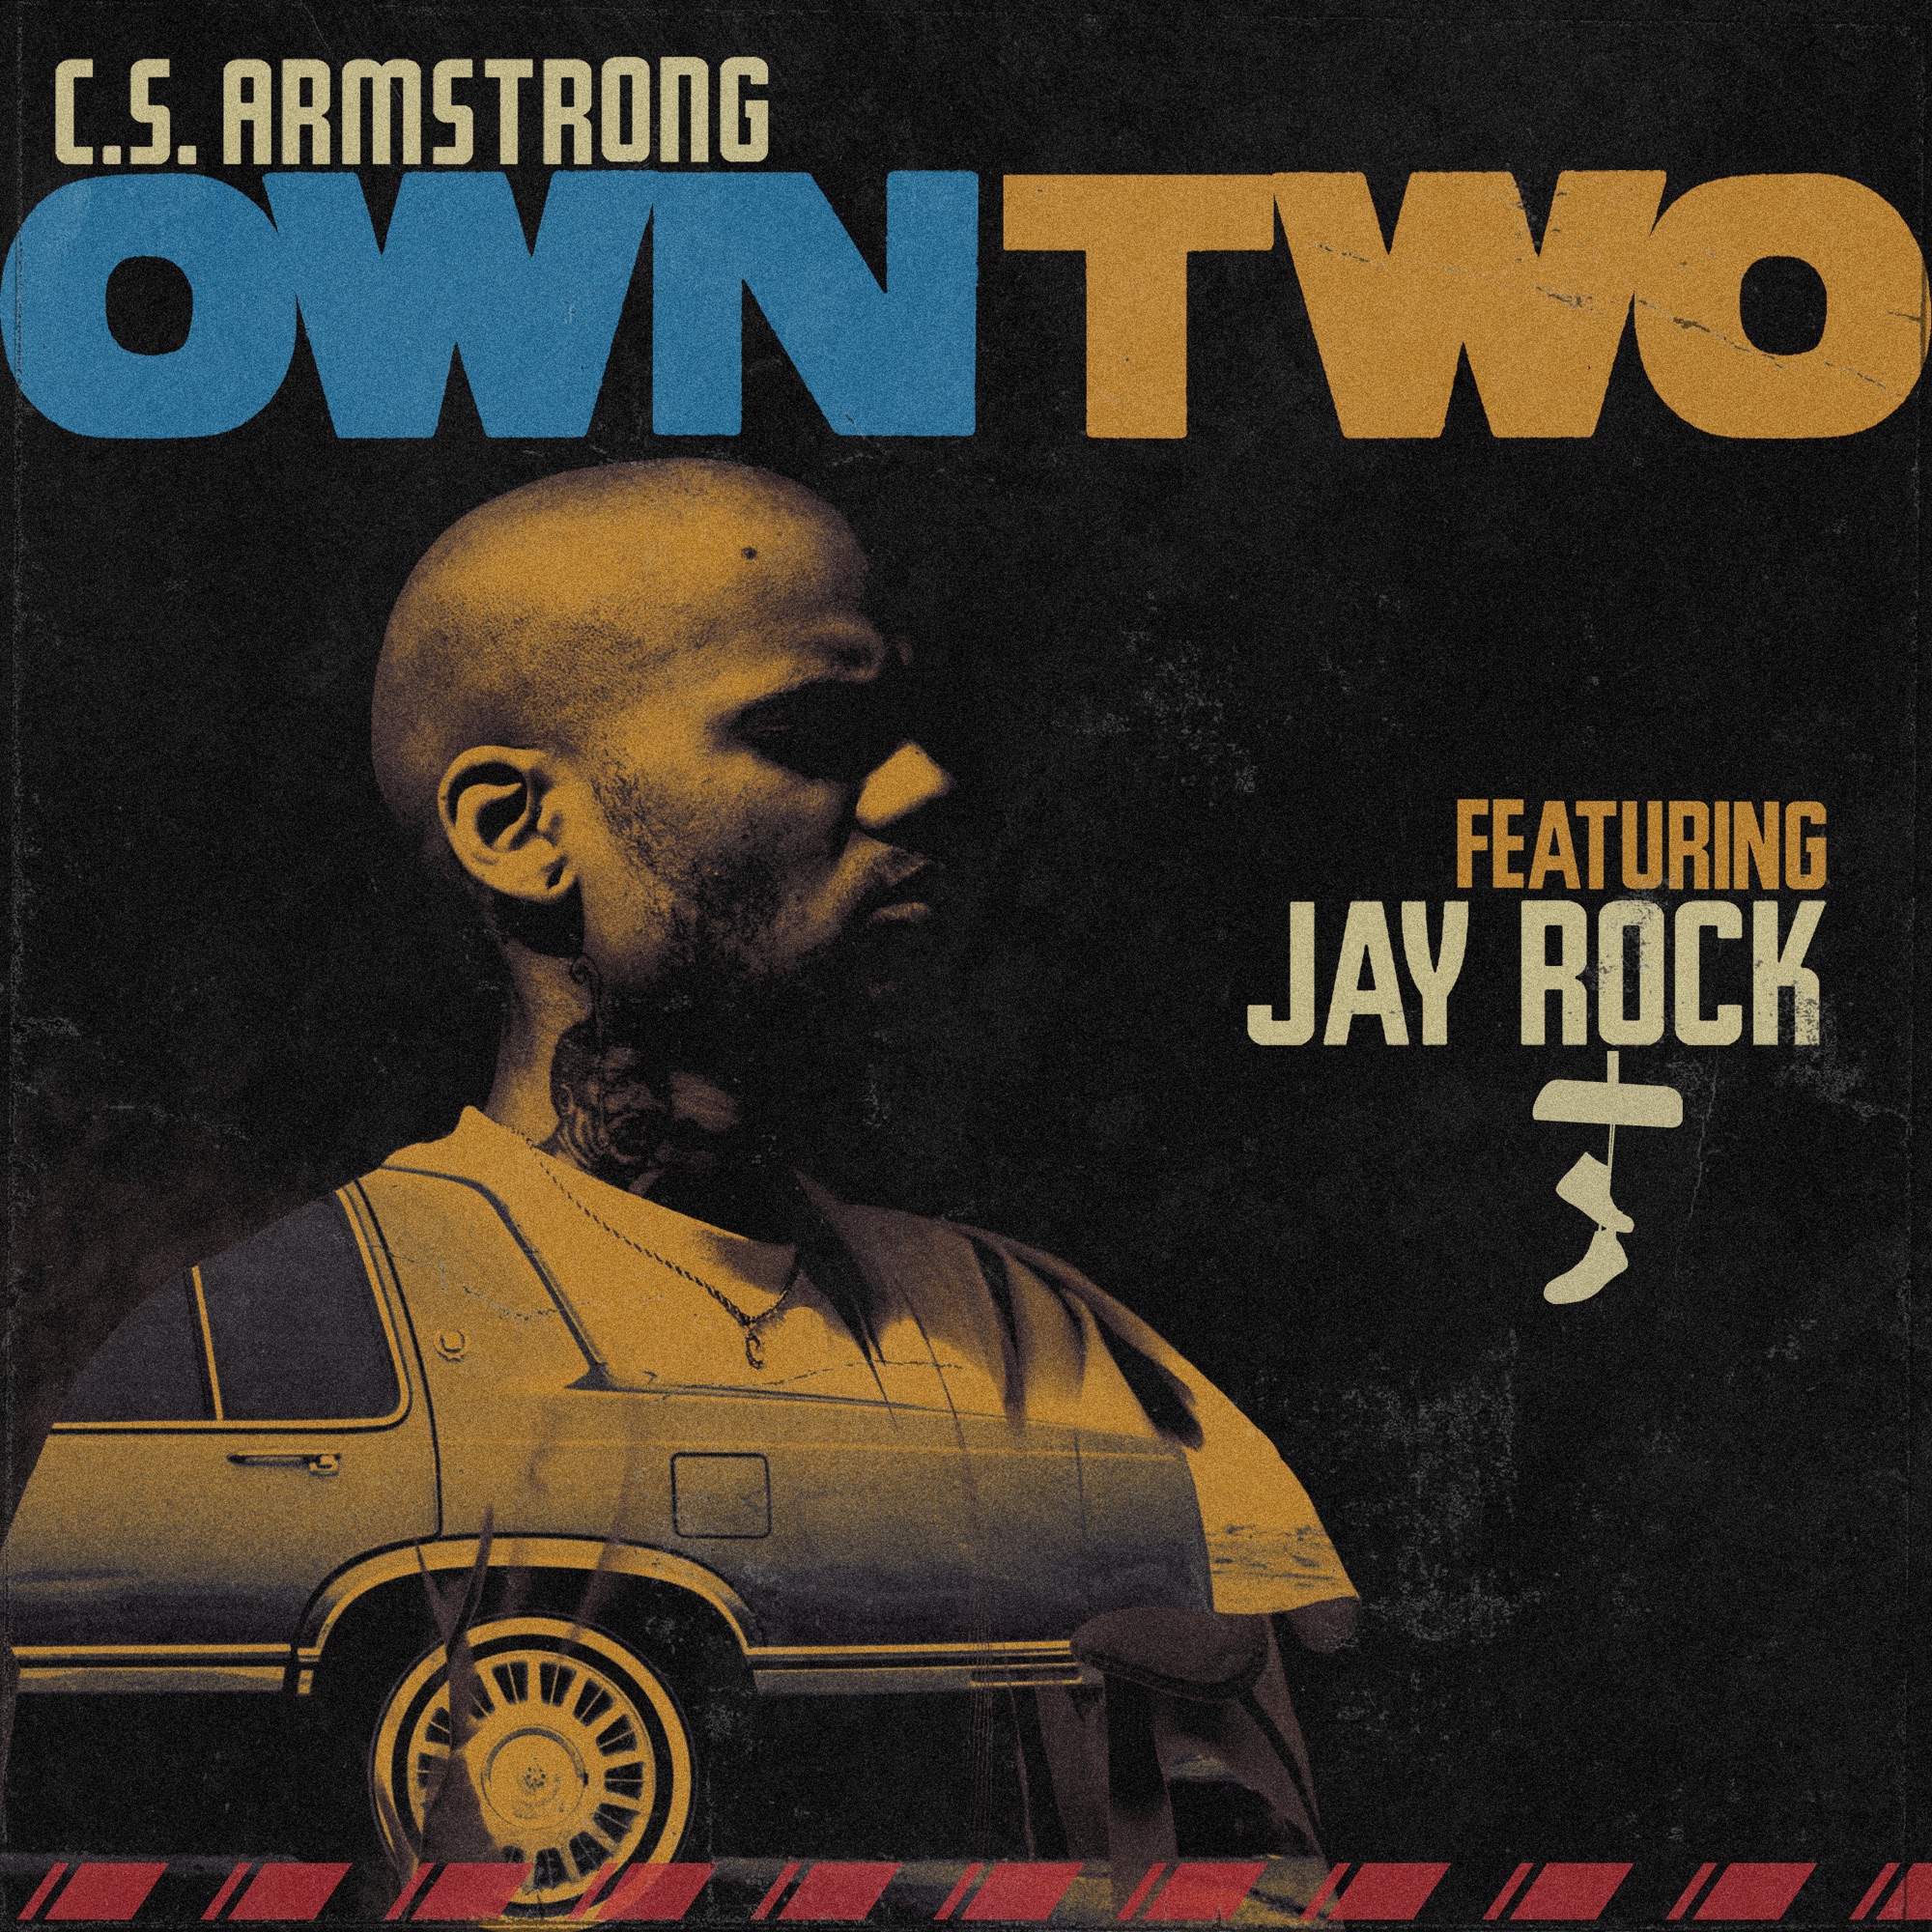 C.S. Armstrong & Jay Rock - Own Two - Single